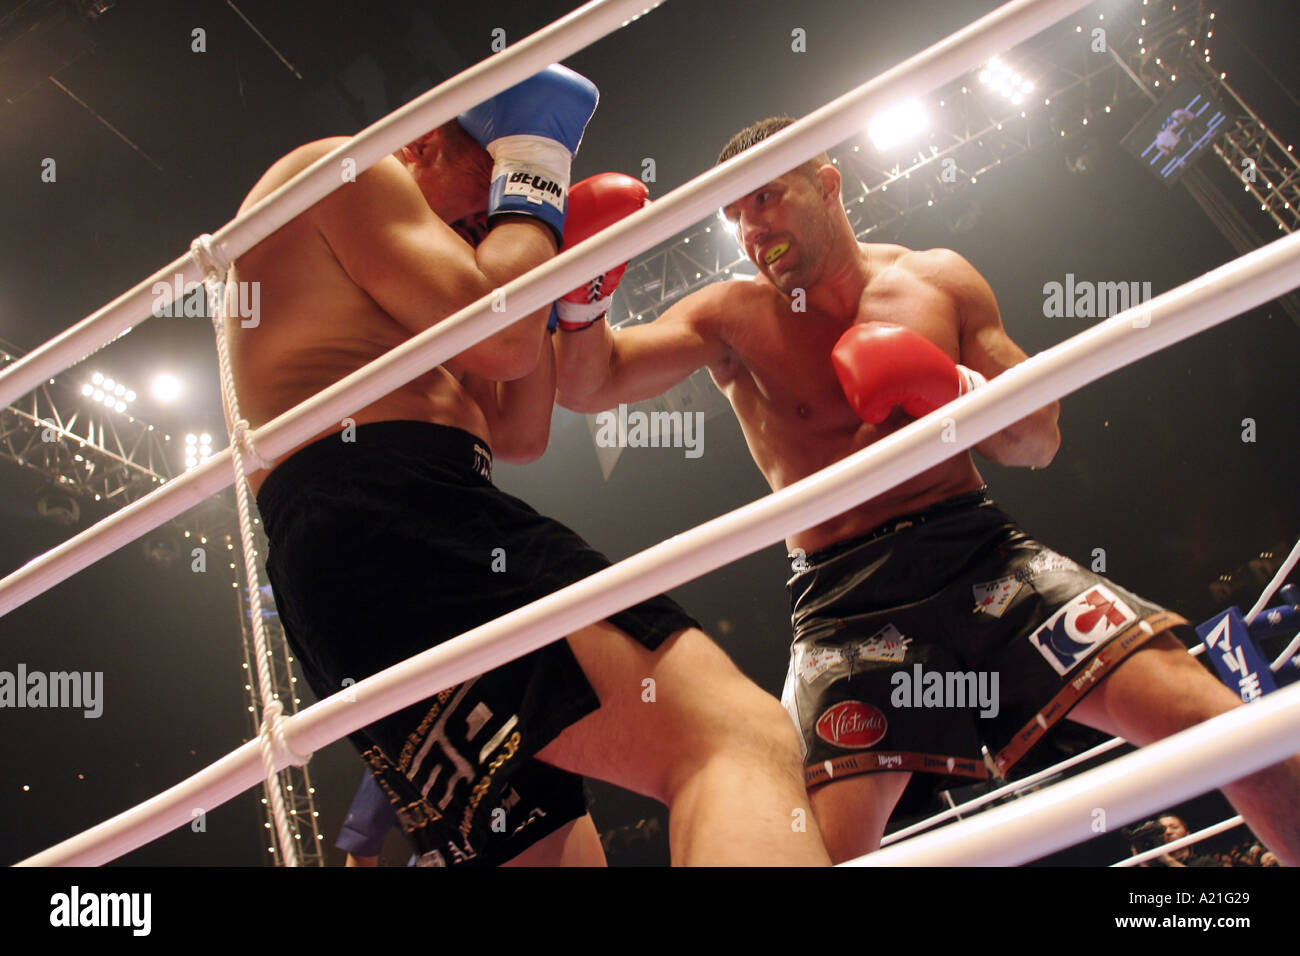 K1 kick boxing fighters in the ring,s een through ropes, Tokyo Dome, Tokyo, Japan Stock Photo